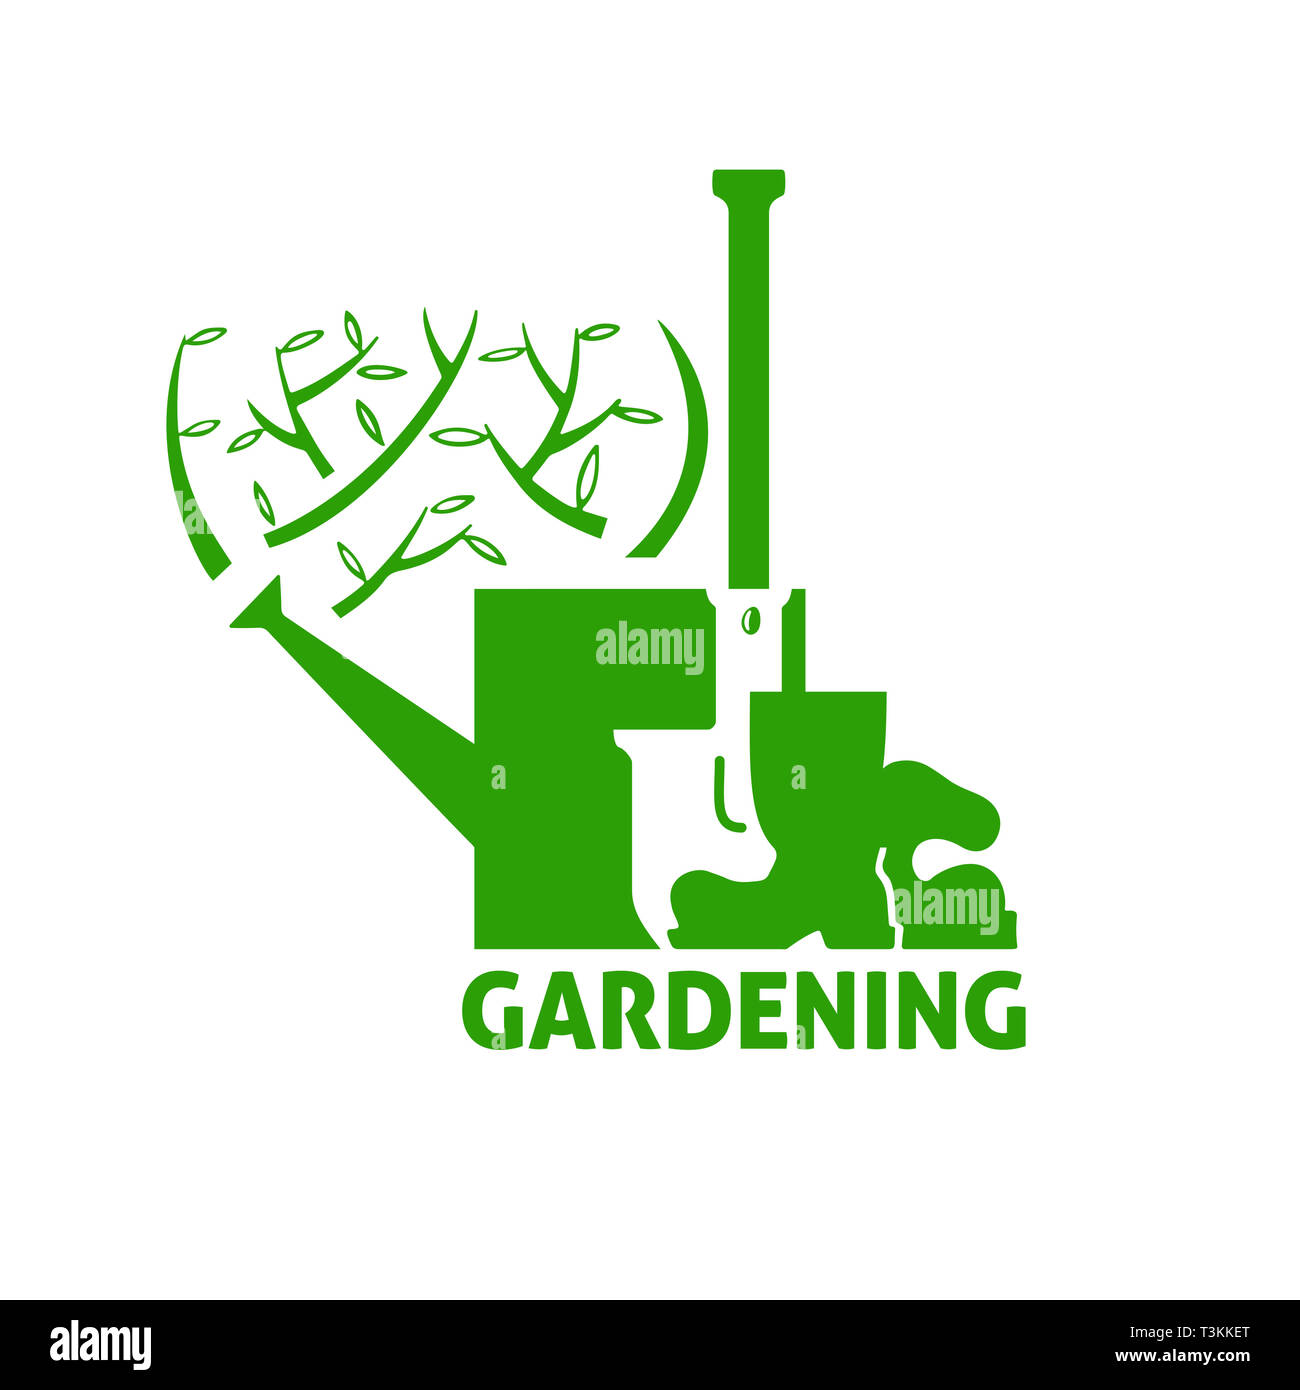 Gardening tools and growing plants. Watering can, shovel, boots. Vector illustration. Stock Photo